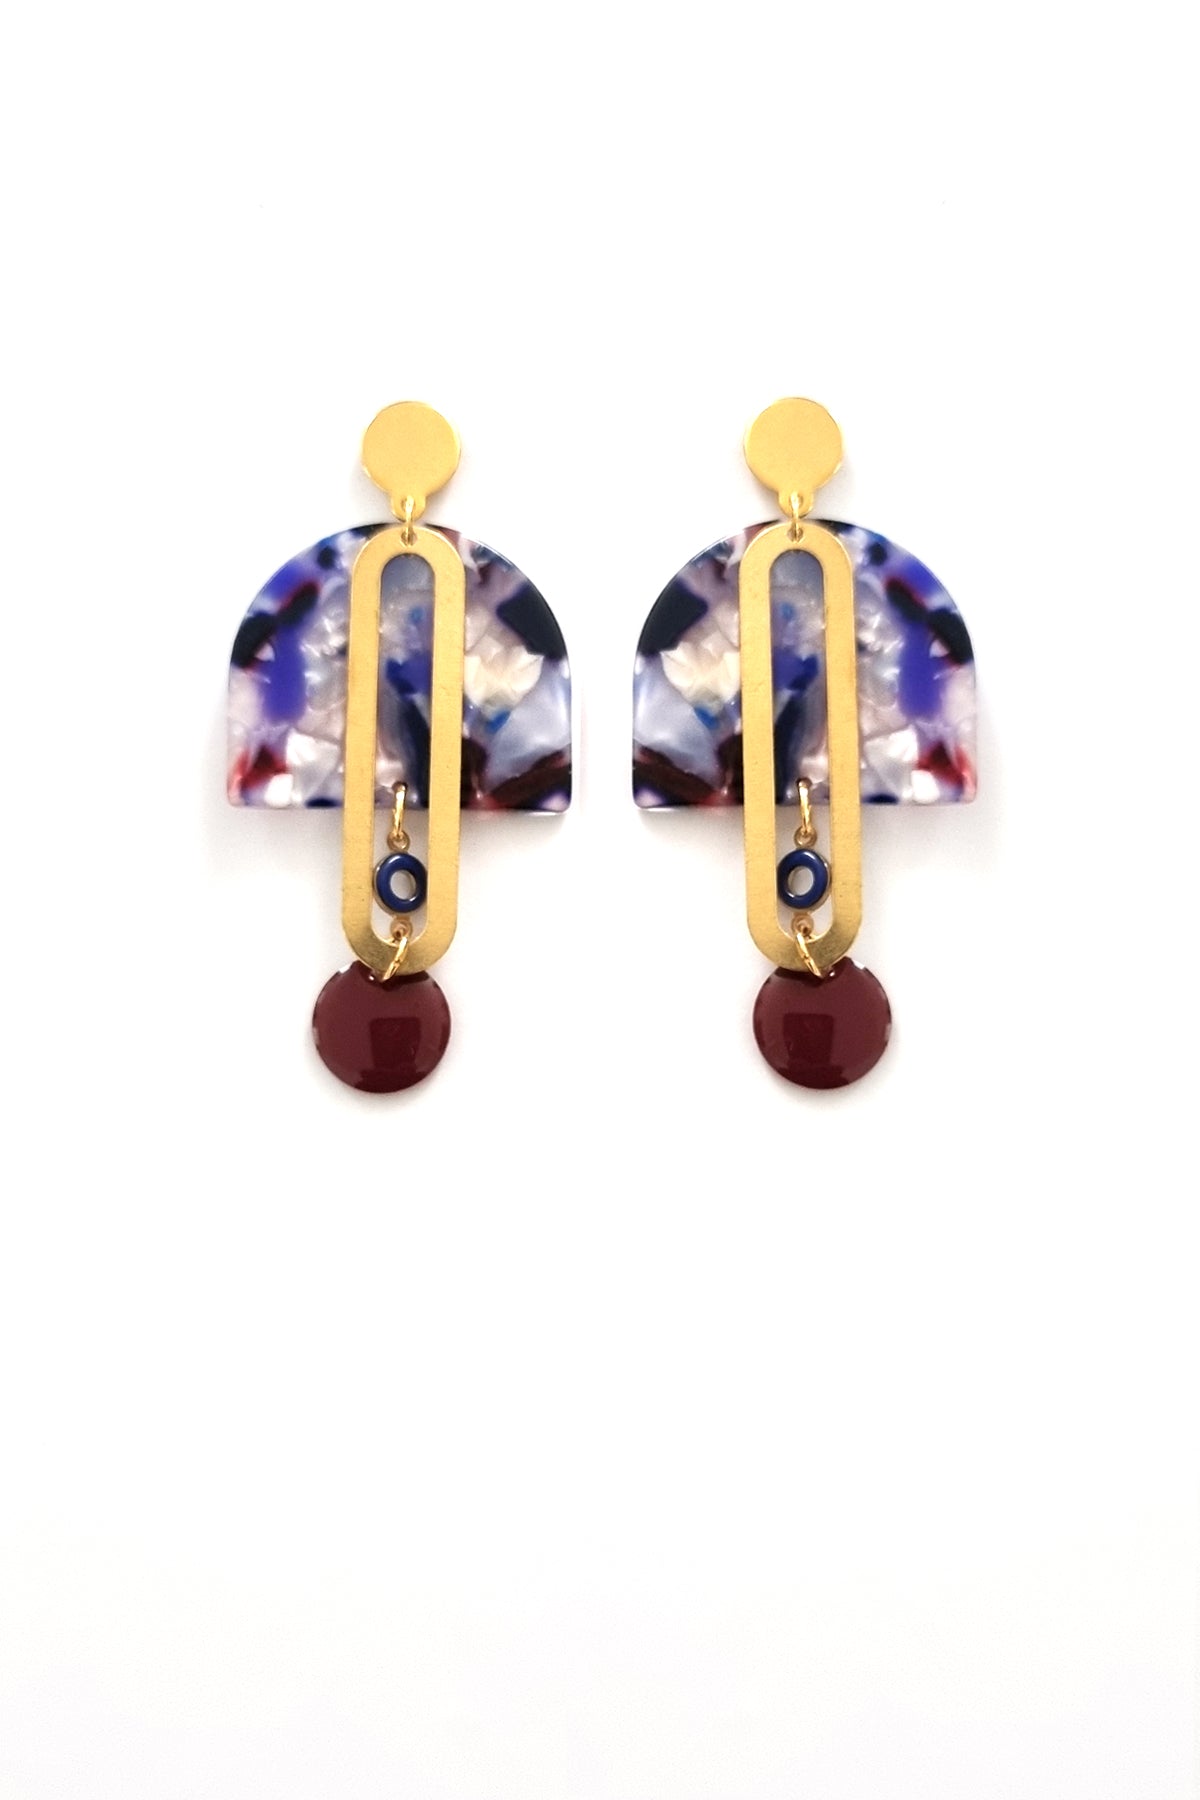 A pair of stud dangle earrings sits against a white background. They feature a blue multicoloured acrylic arch, an elongated oval brass piece with a small blue enamel connector attaching the acrylic piece to the brass, and at the bottom hangs a bordo red enamel dot.